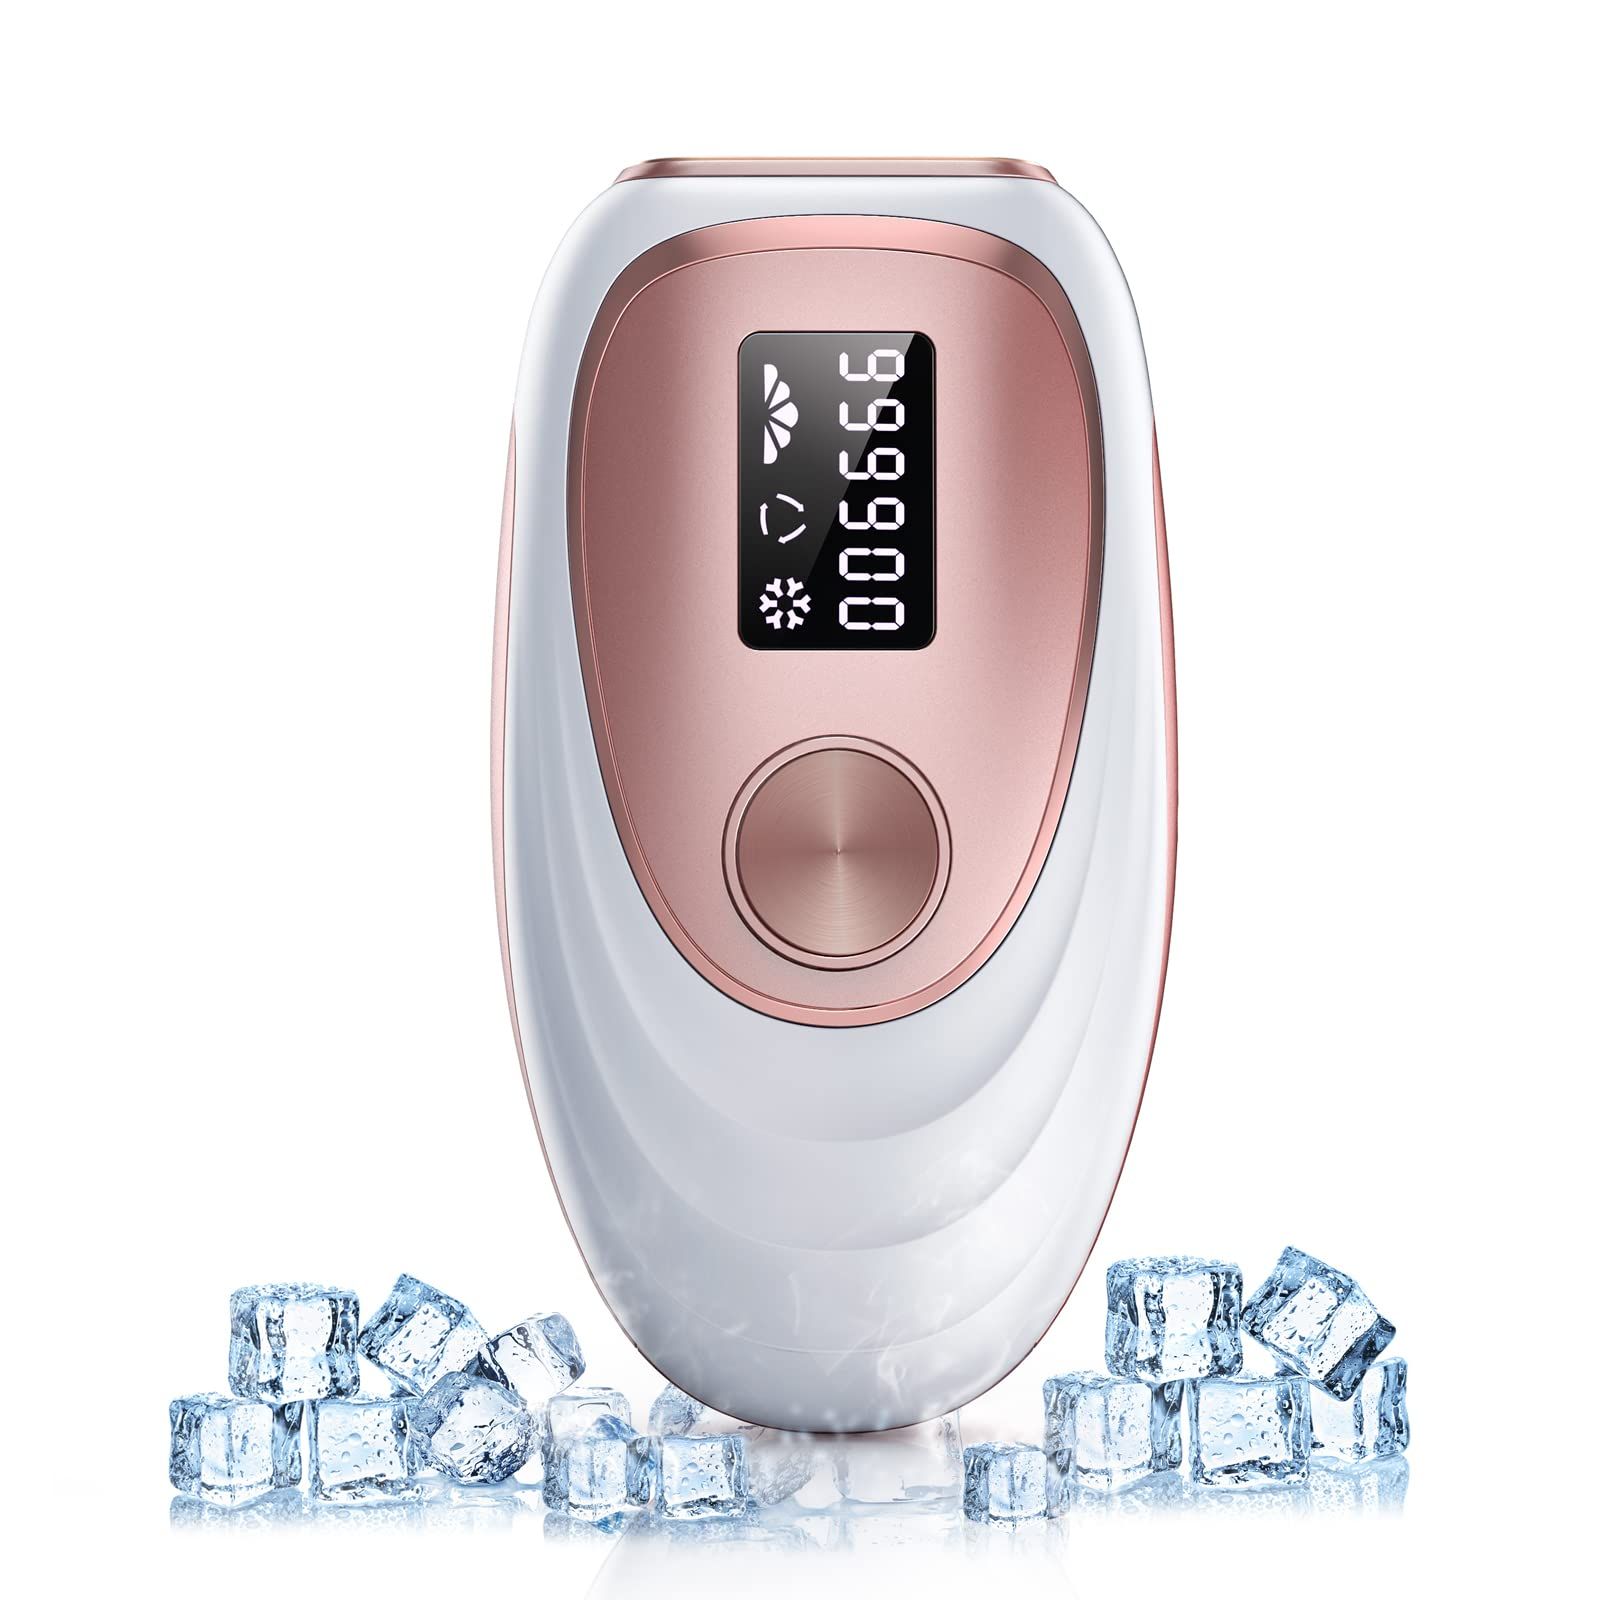 Amazoncom Hair Removal Machine Portable 808 Diode Laser Hair Removal  Machine Designed for Beauty Salon 3 wavelengths 755nm 808nm 1064nm   Beauty  Personal Care